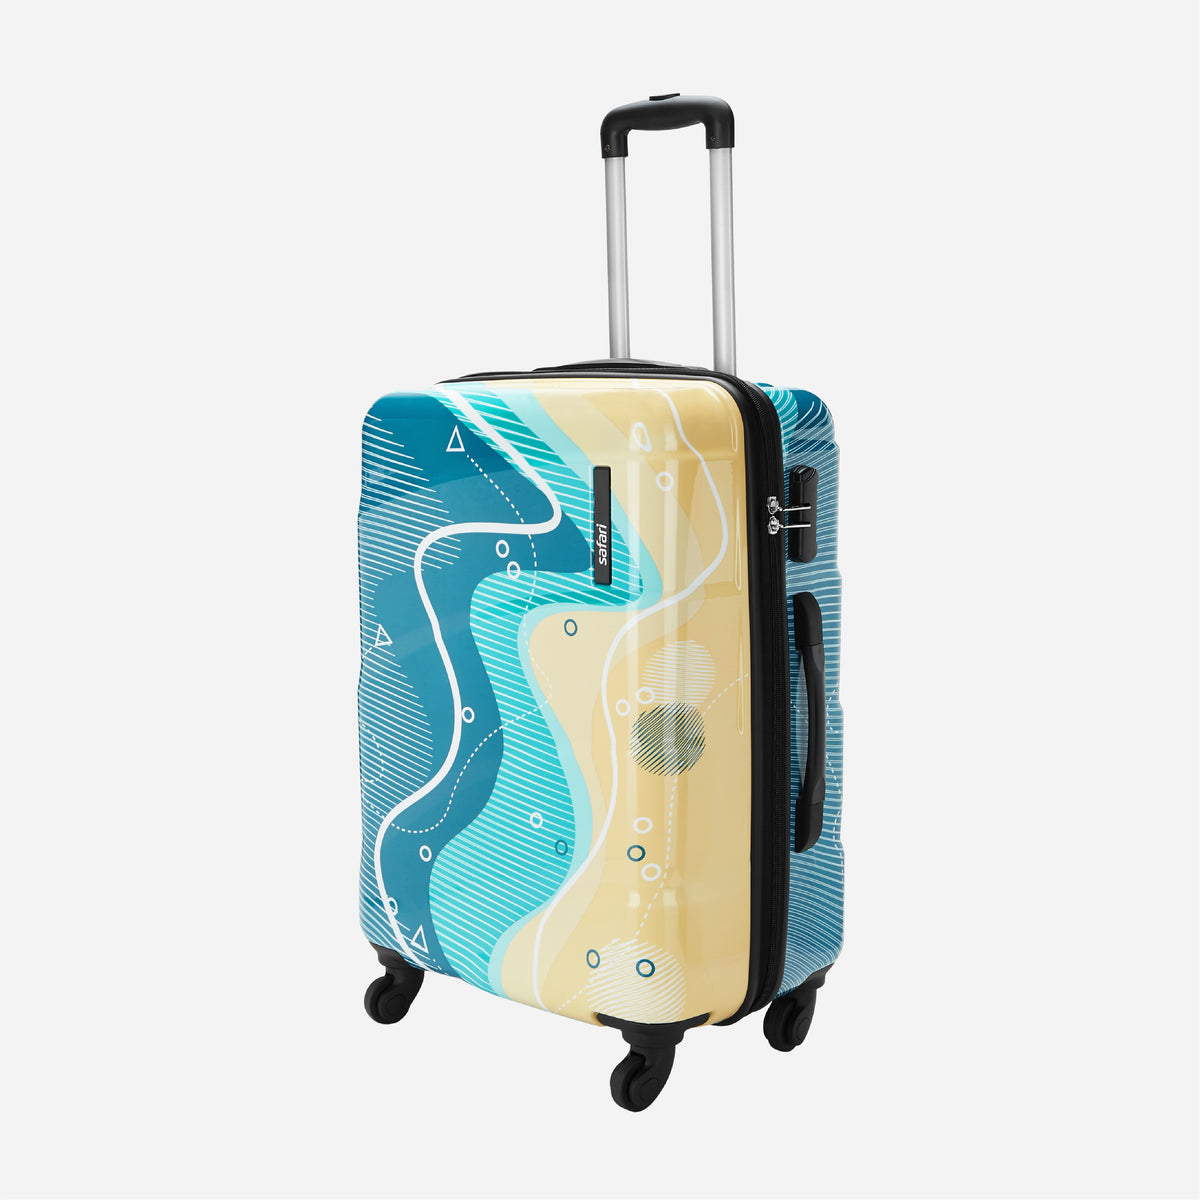 Skybags Rubik Polyester 58 Cms Softsided Cabin Luggage | Trolley bags,  Luggage, Cabin luggage